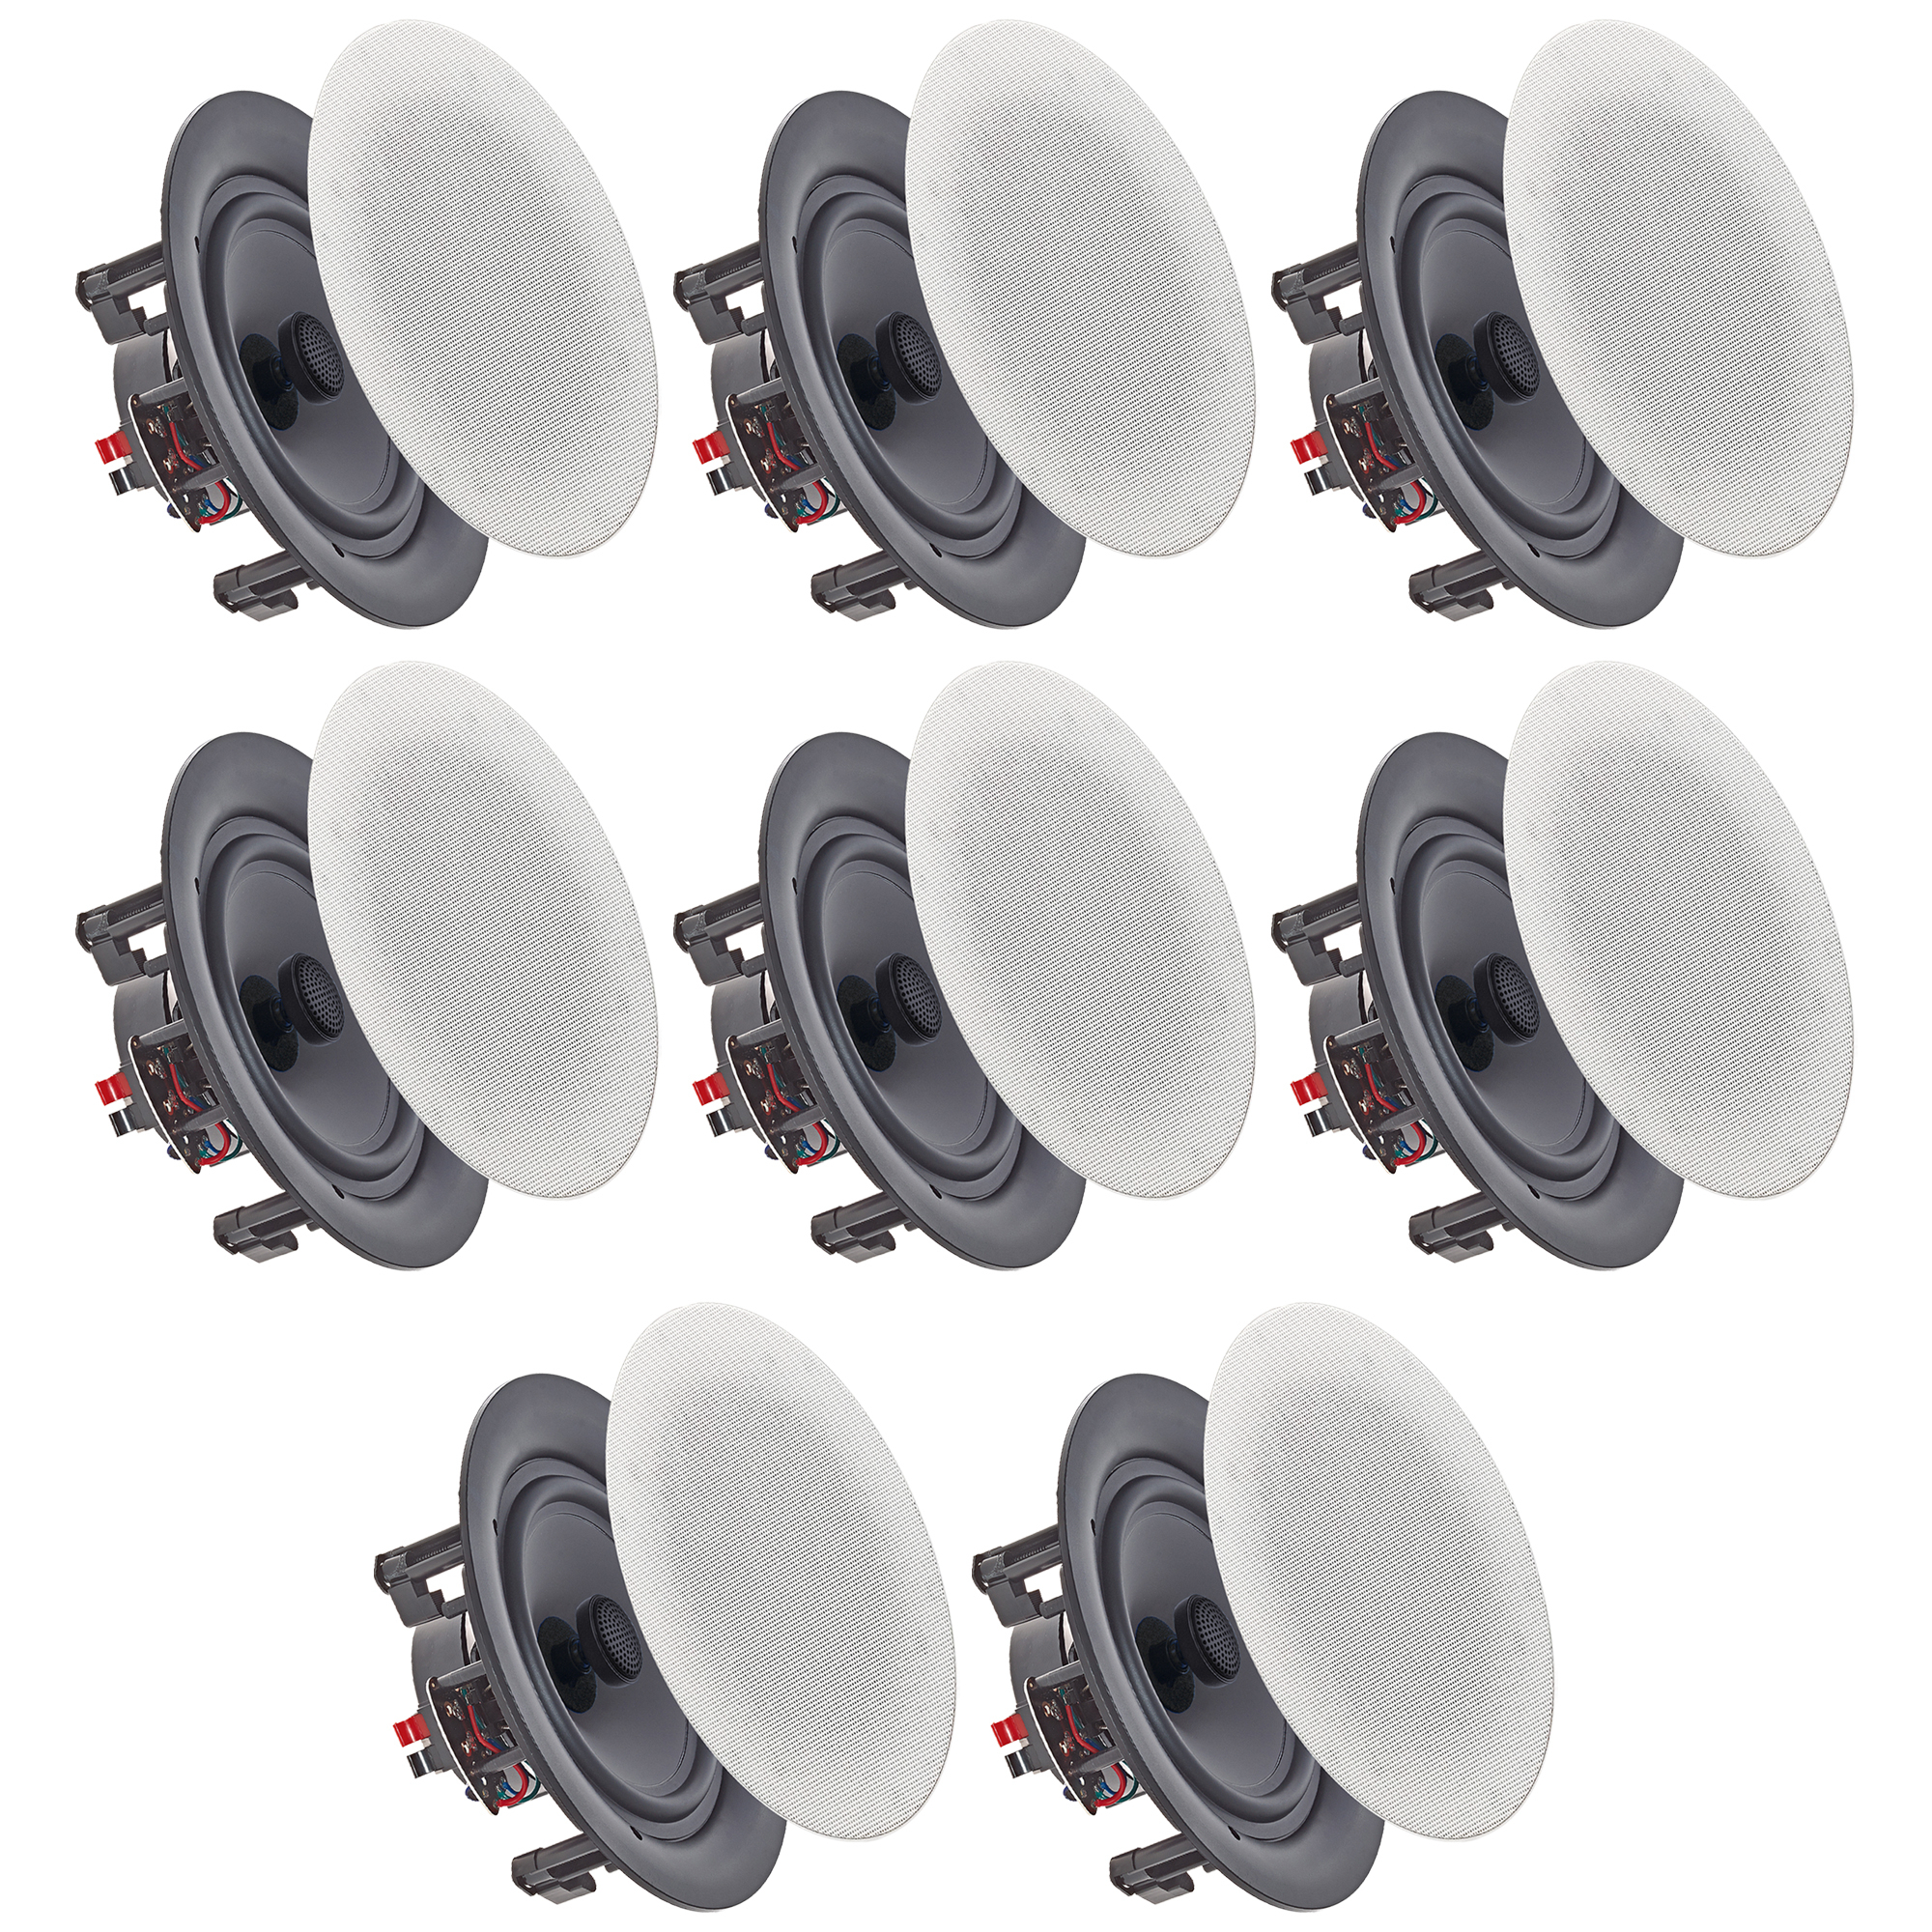 Set Of (8) Vaiyer 6.5 Inch 8 Ohm 200 Watts Frameless Speakers, Flush Mount In-Wall In-Ceiling 2-Way Mid Bass Woofer Speakers